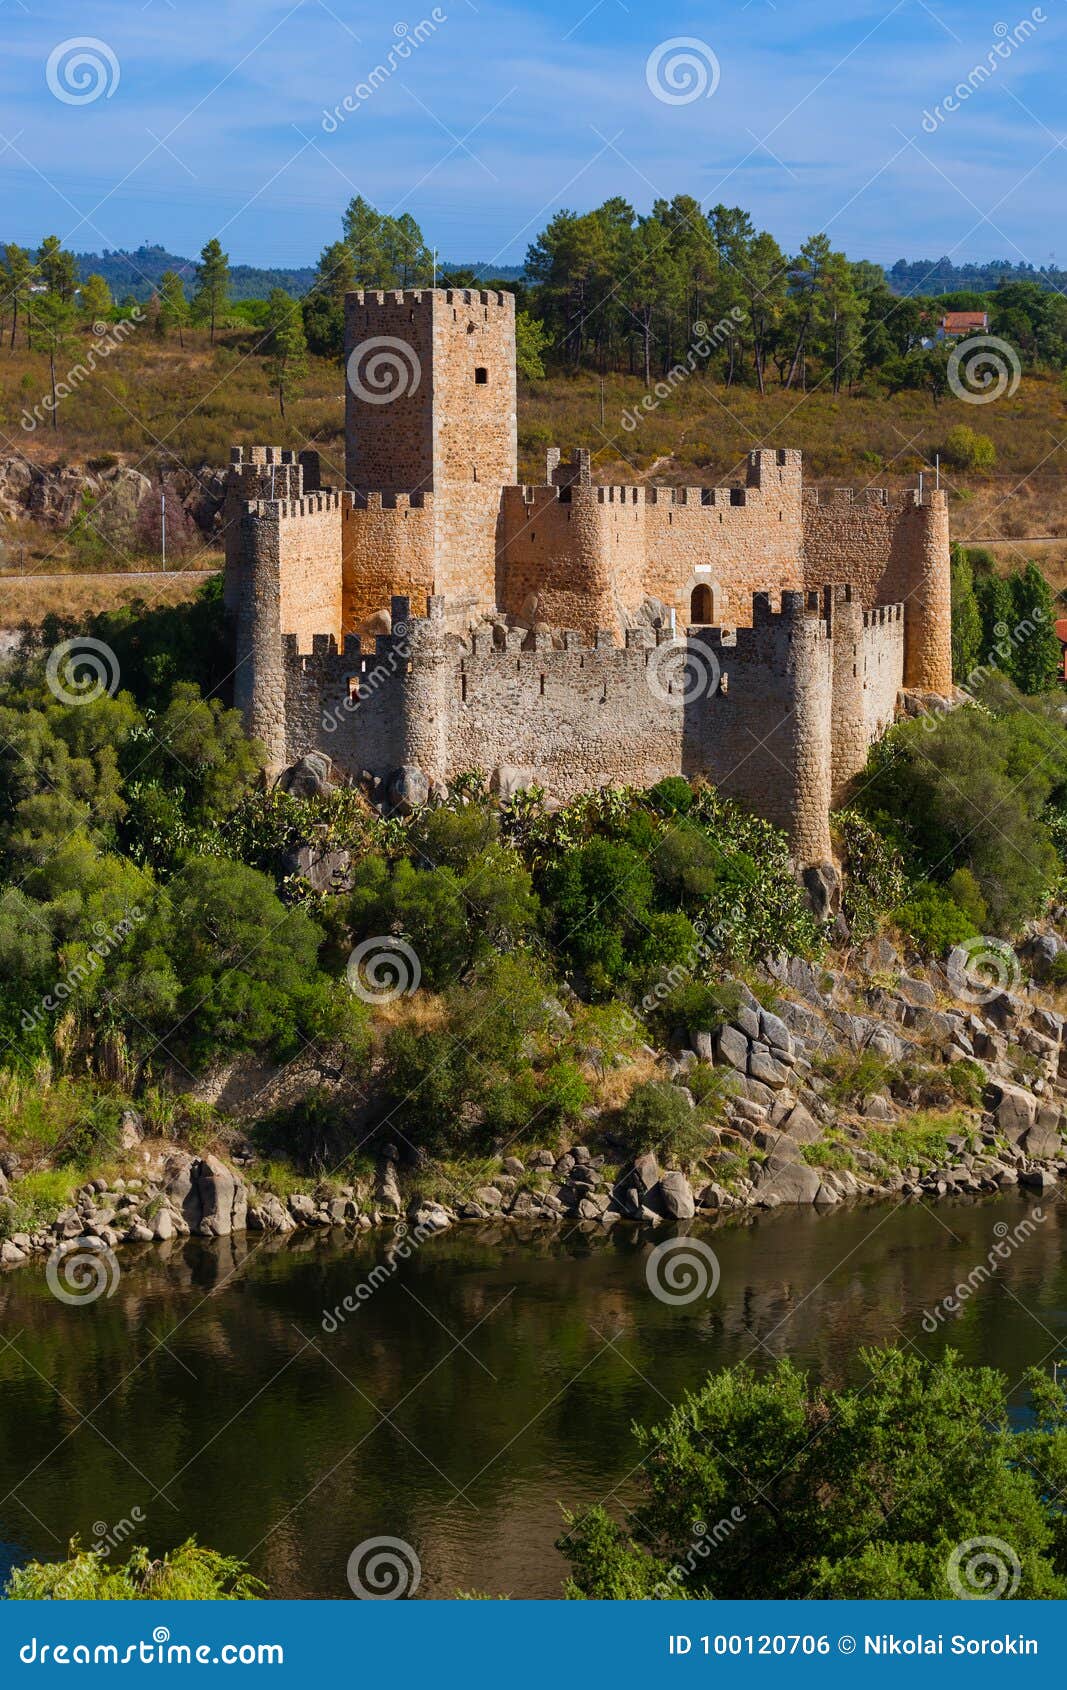 266 Almourol Castle Photos Free Royalty Free Stock Photos From Dreamstime